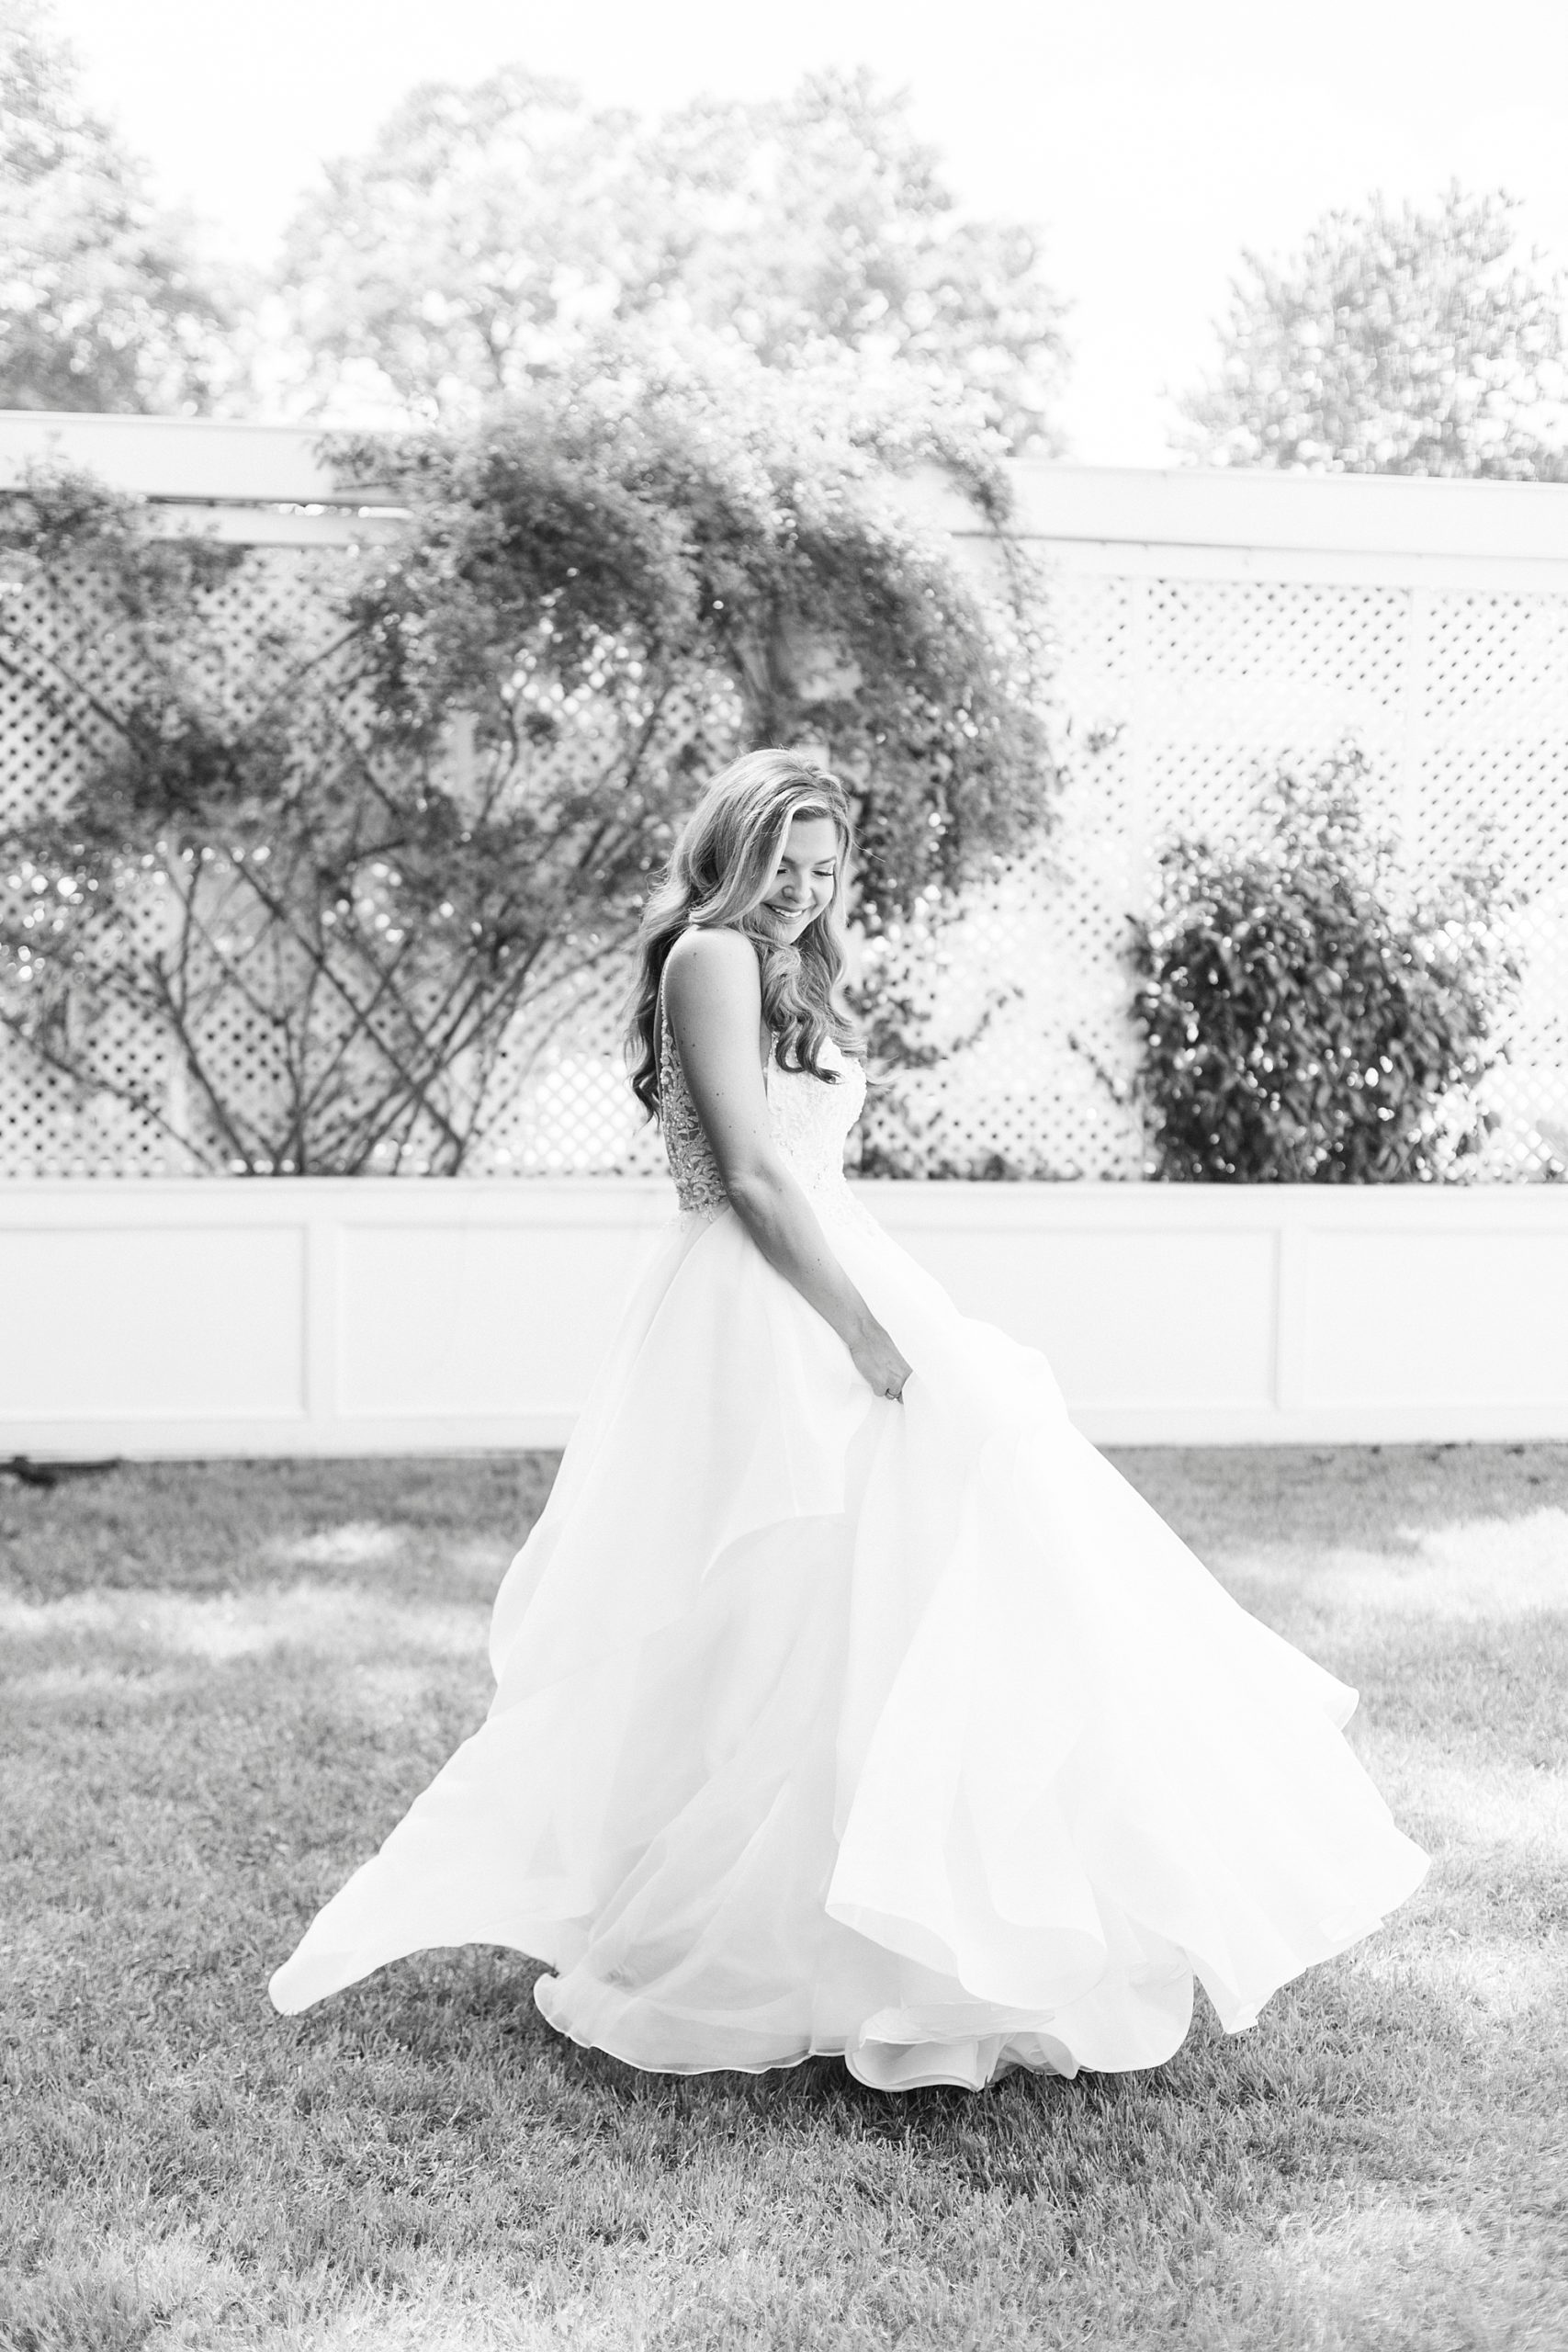 black and white portrait of bride twirling wedding gown